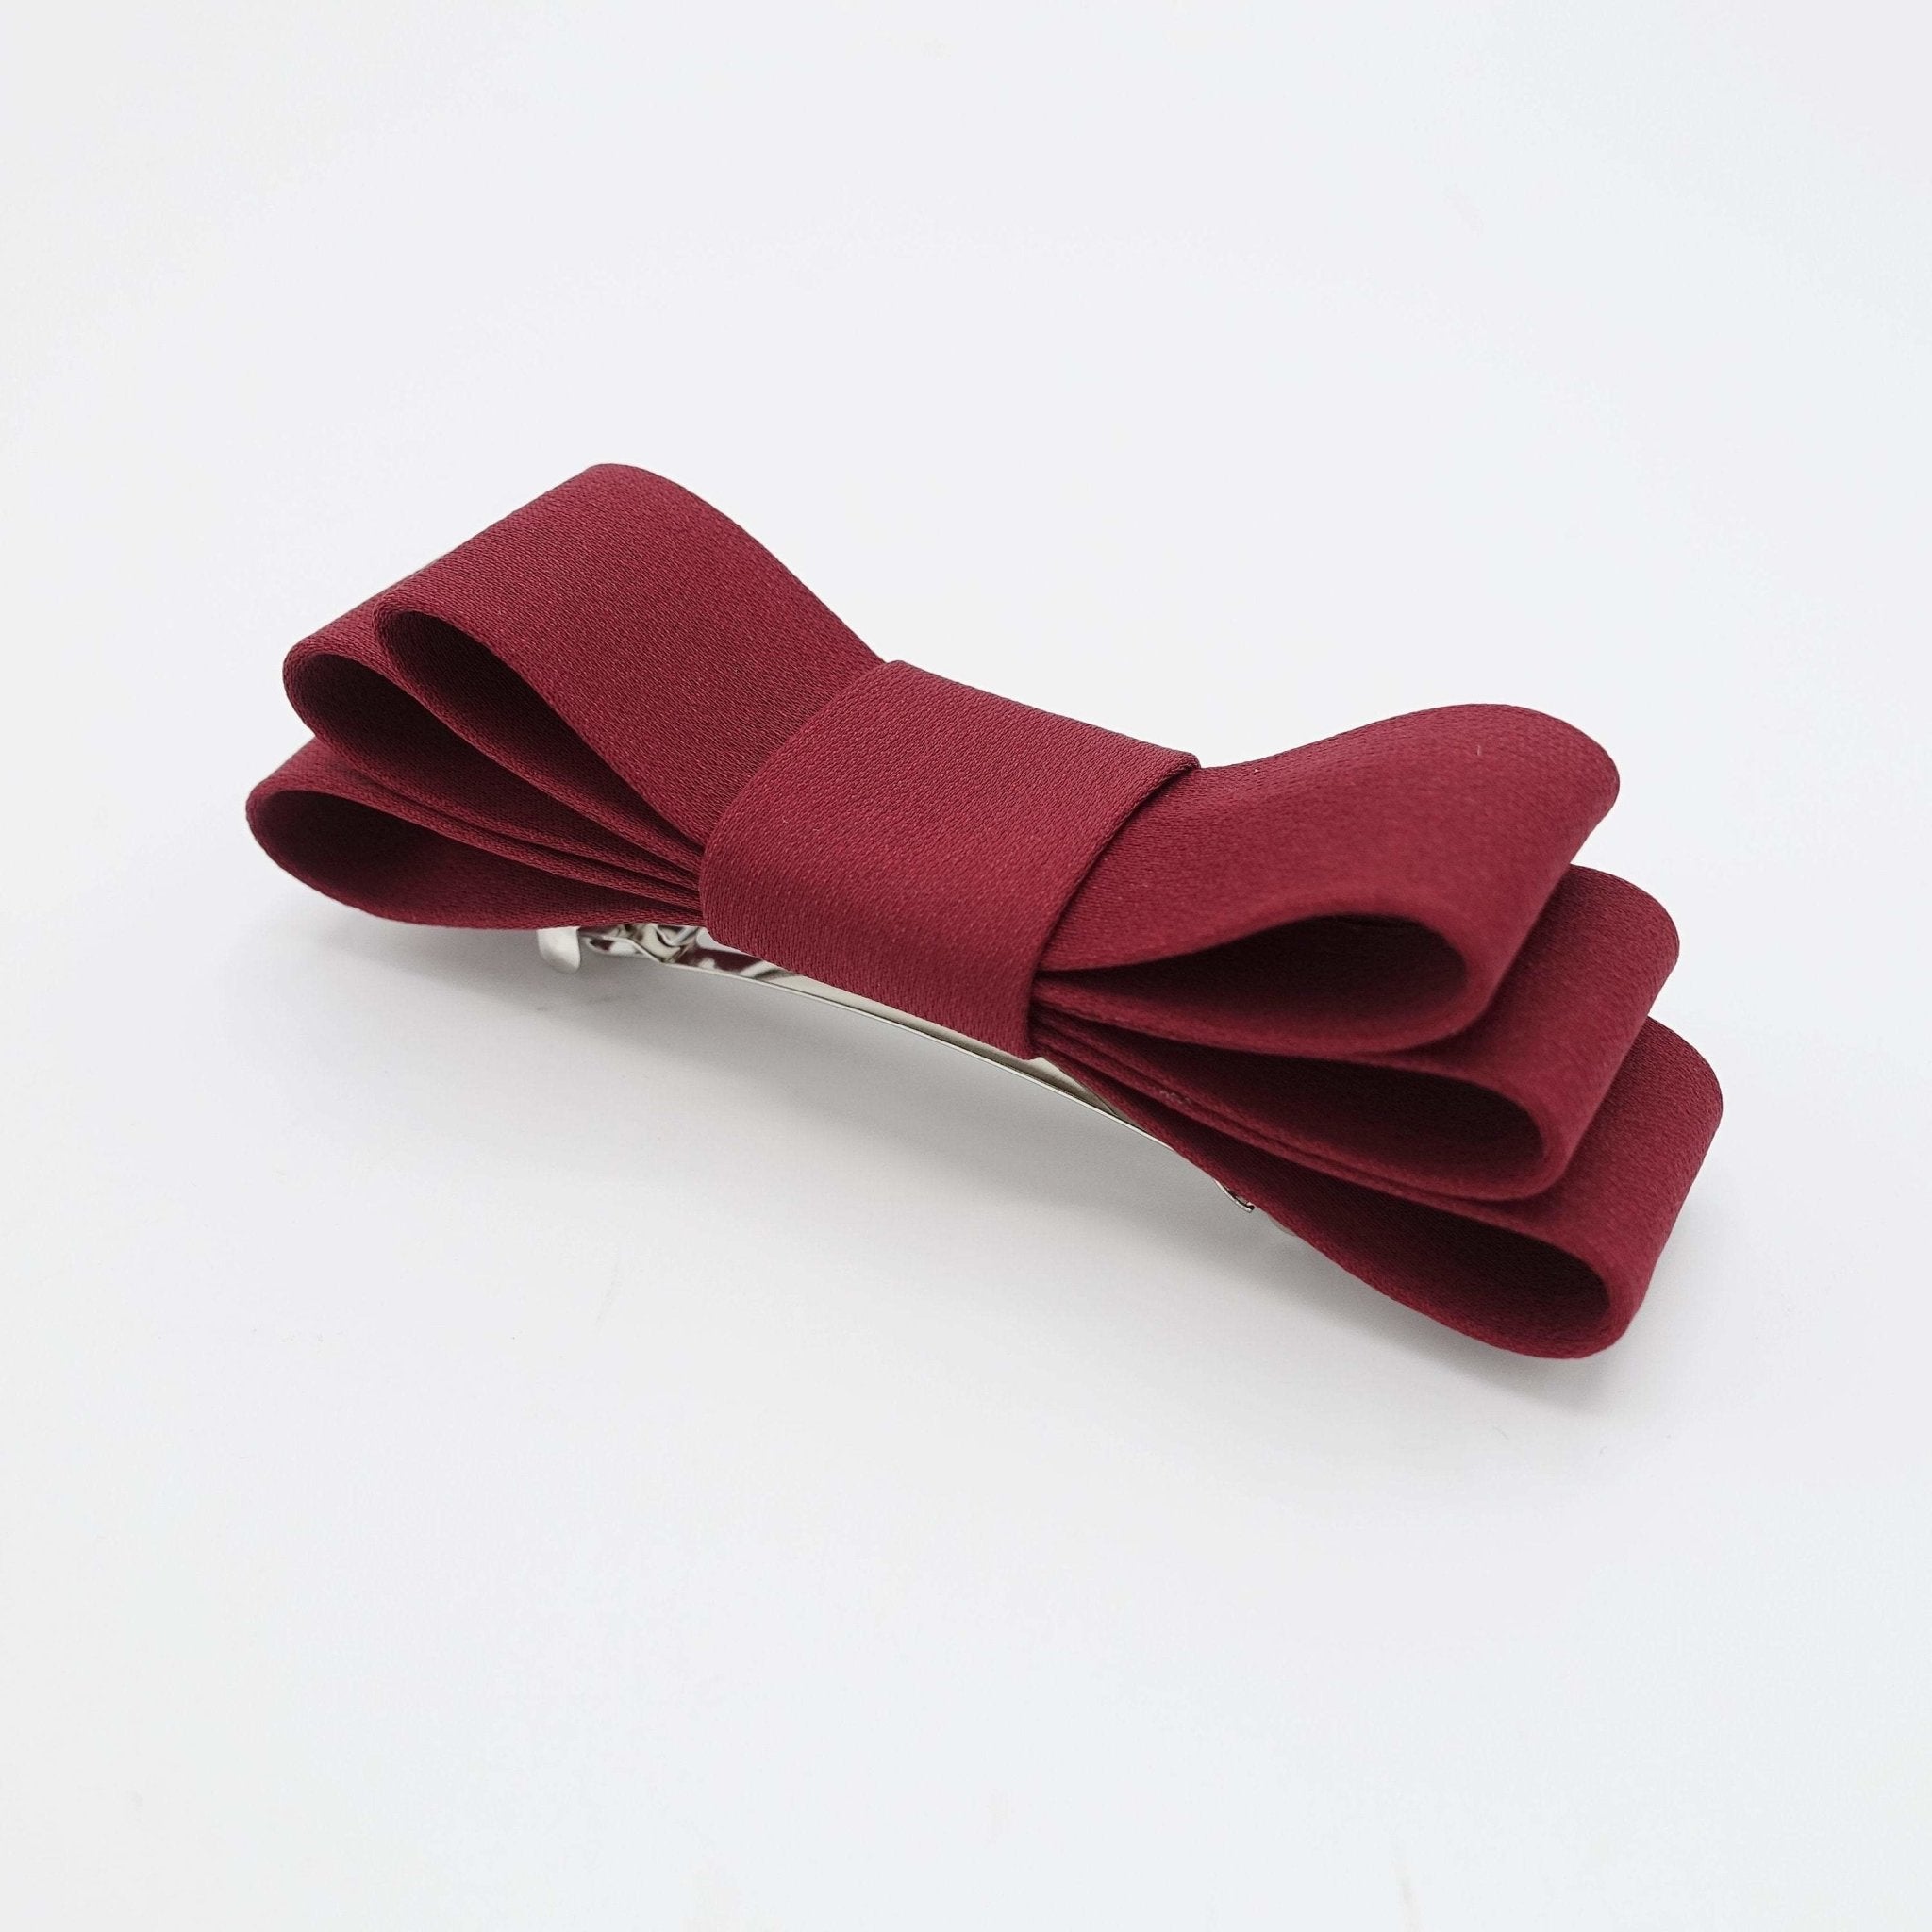 VeryShine claw/banana/barrette Red wine double layered flat bow french hair barrette women hair accessory